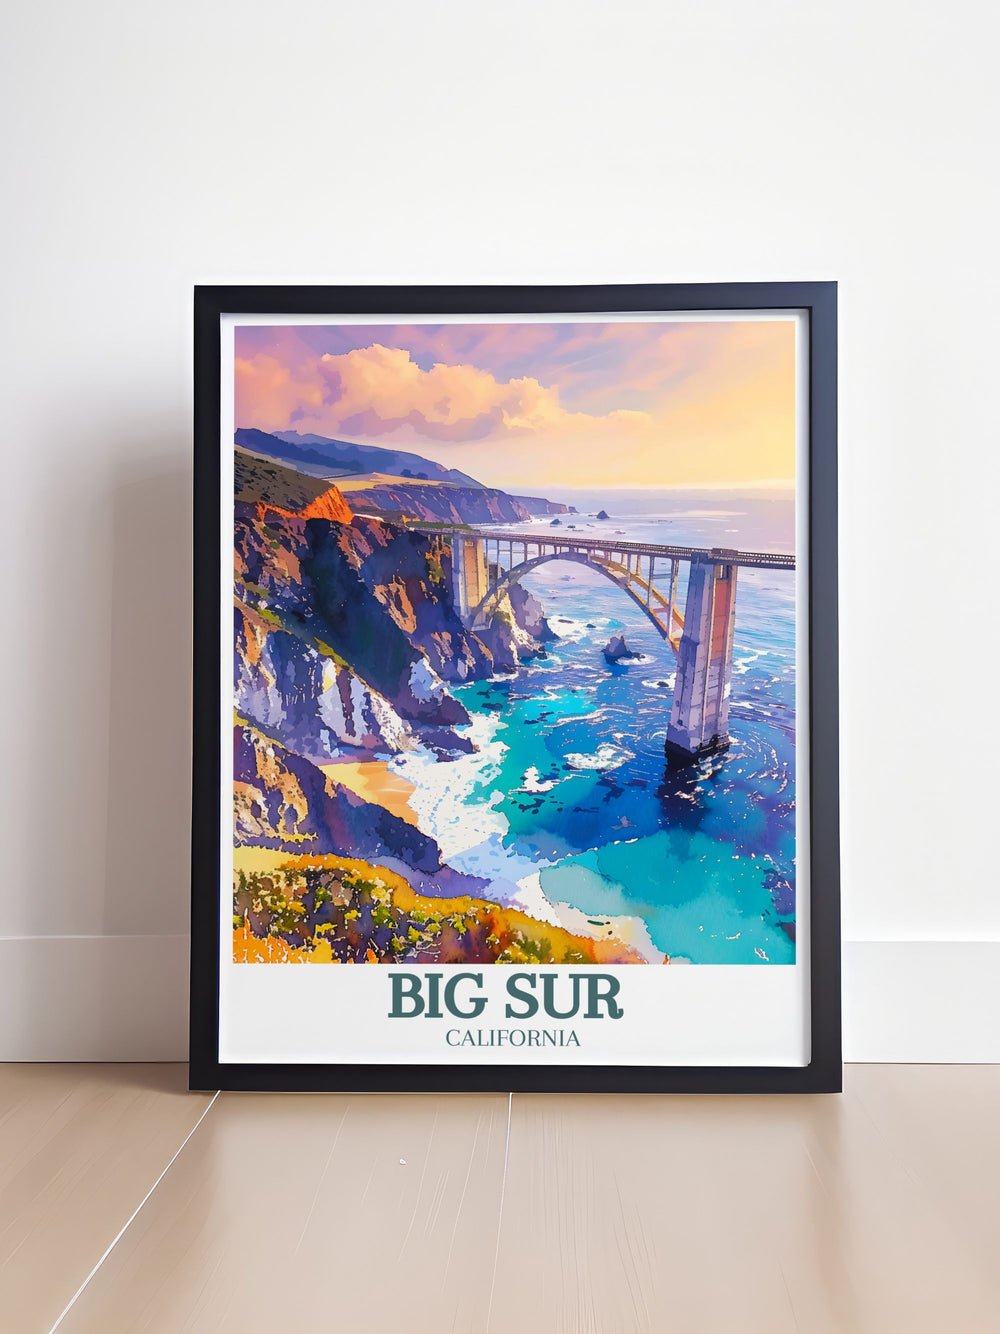 This detailed art print captures the stunning beauty of Big Sur, California, featuring the iconic Bixby Creek Bridge and the dramatic Pacific coastline, perfect for adding a touch of coastal charm to your home decor.